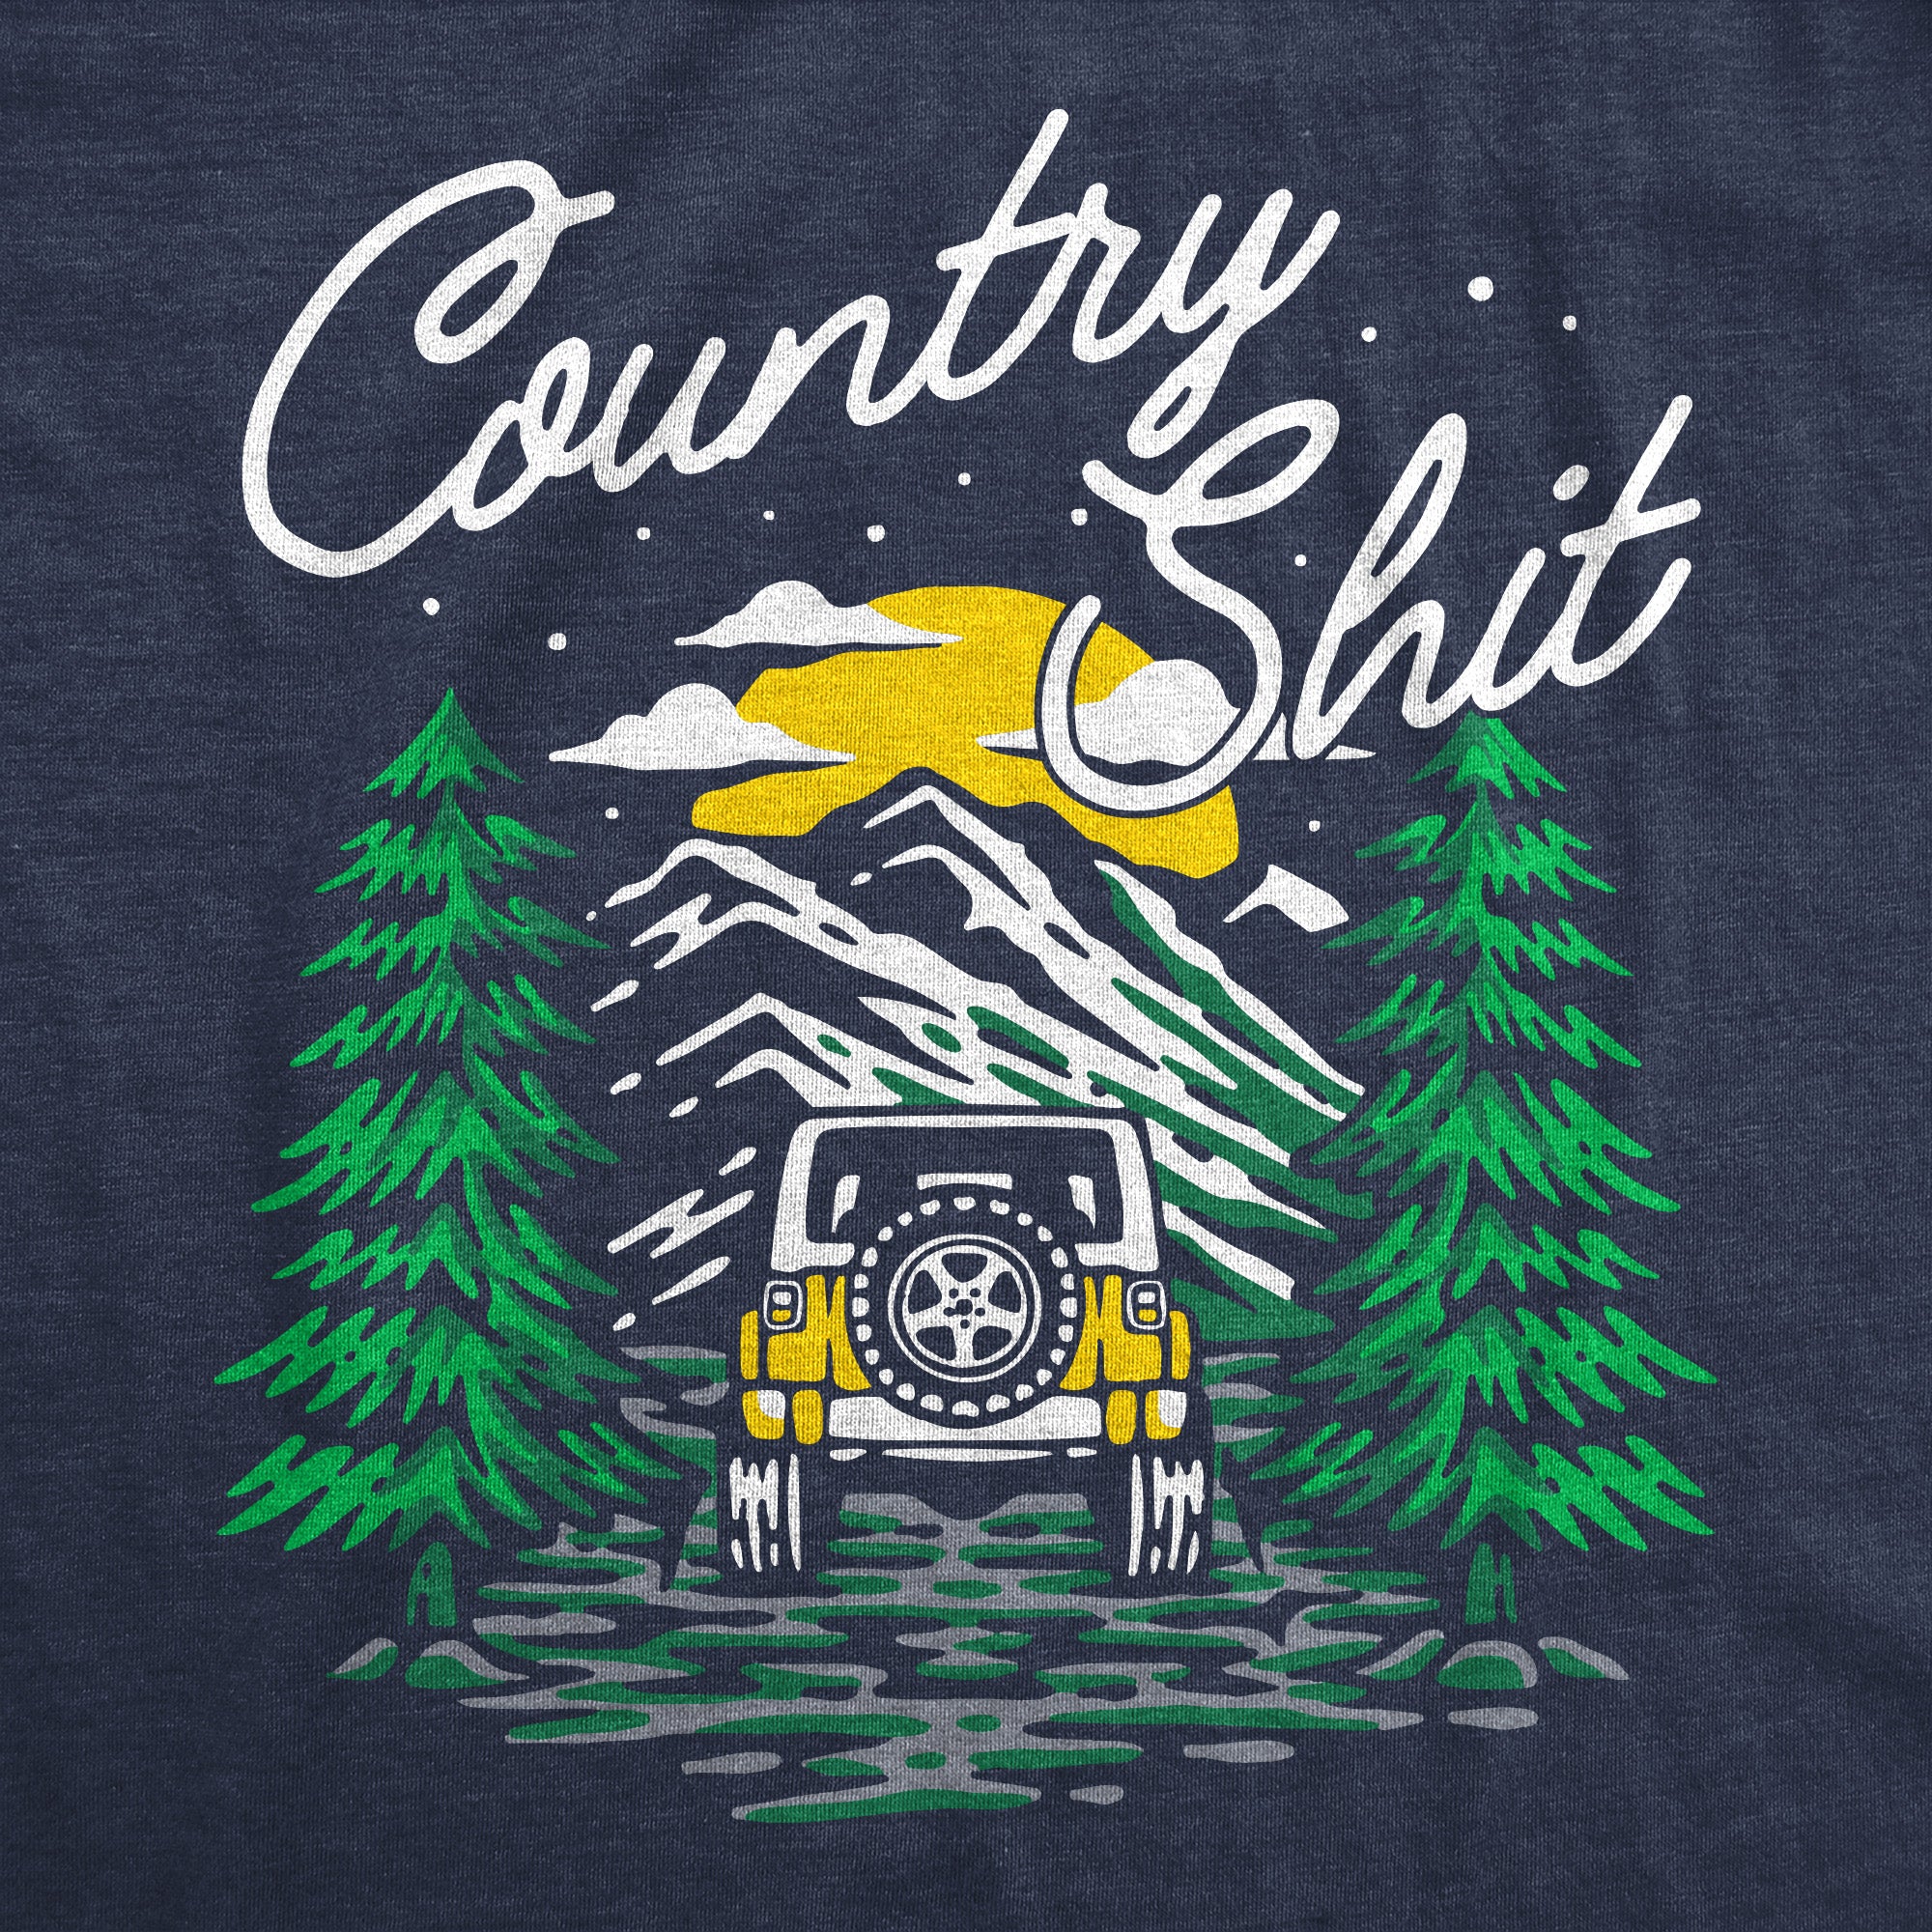 Funny Heather Navy - COUNTRY Country Shit Womens T Shirt Nerdy camping Tee